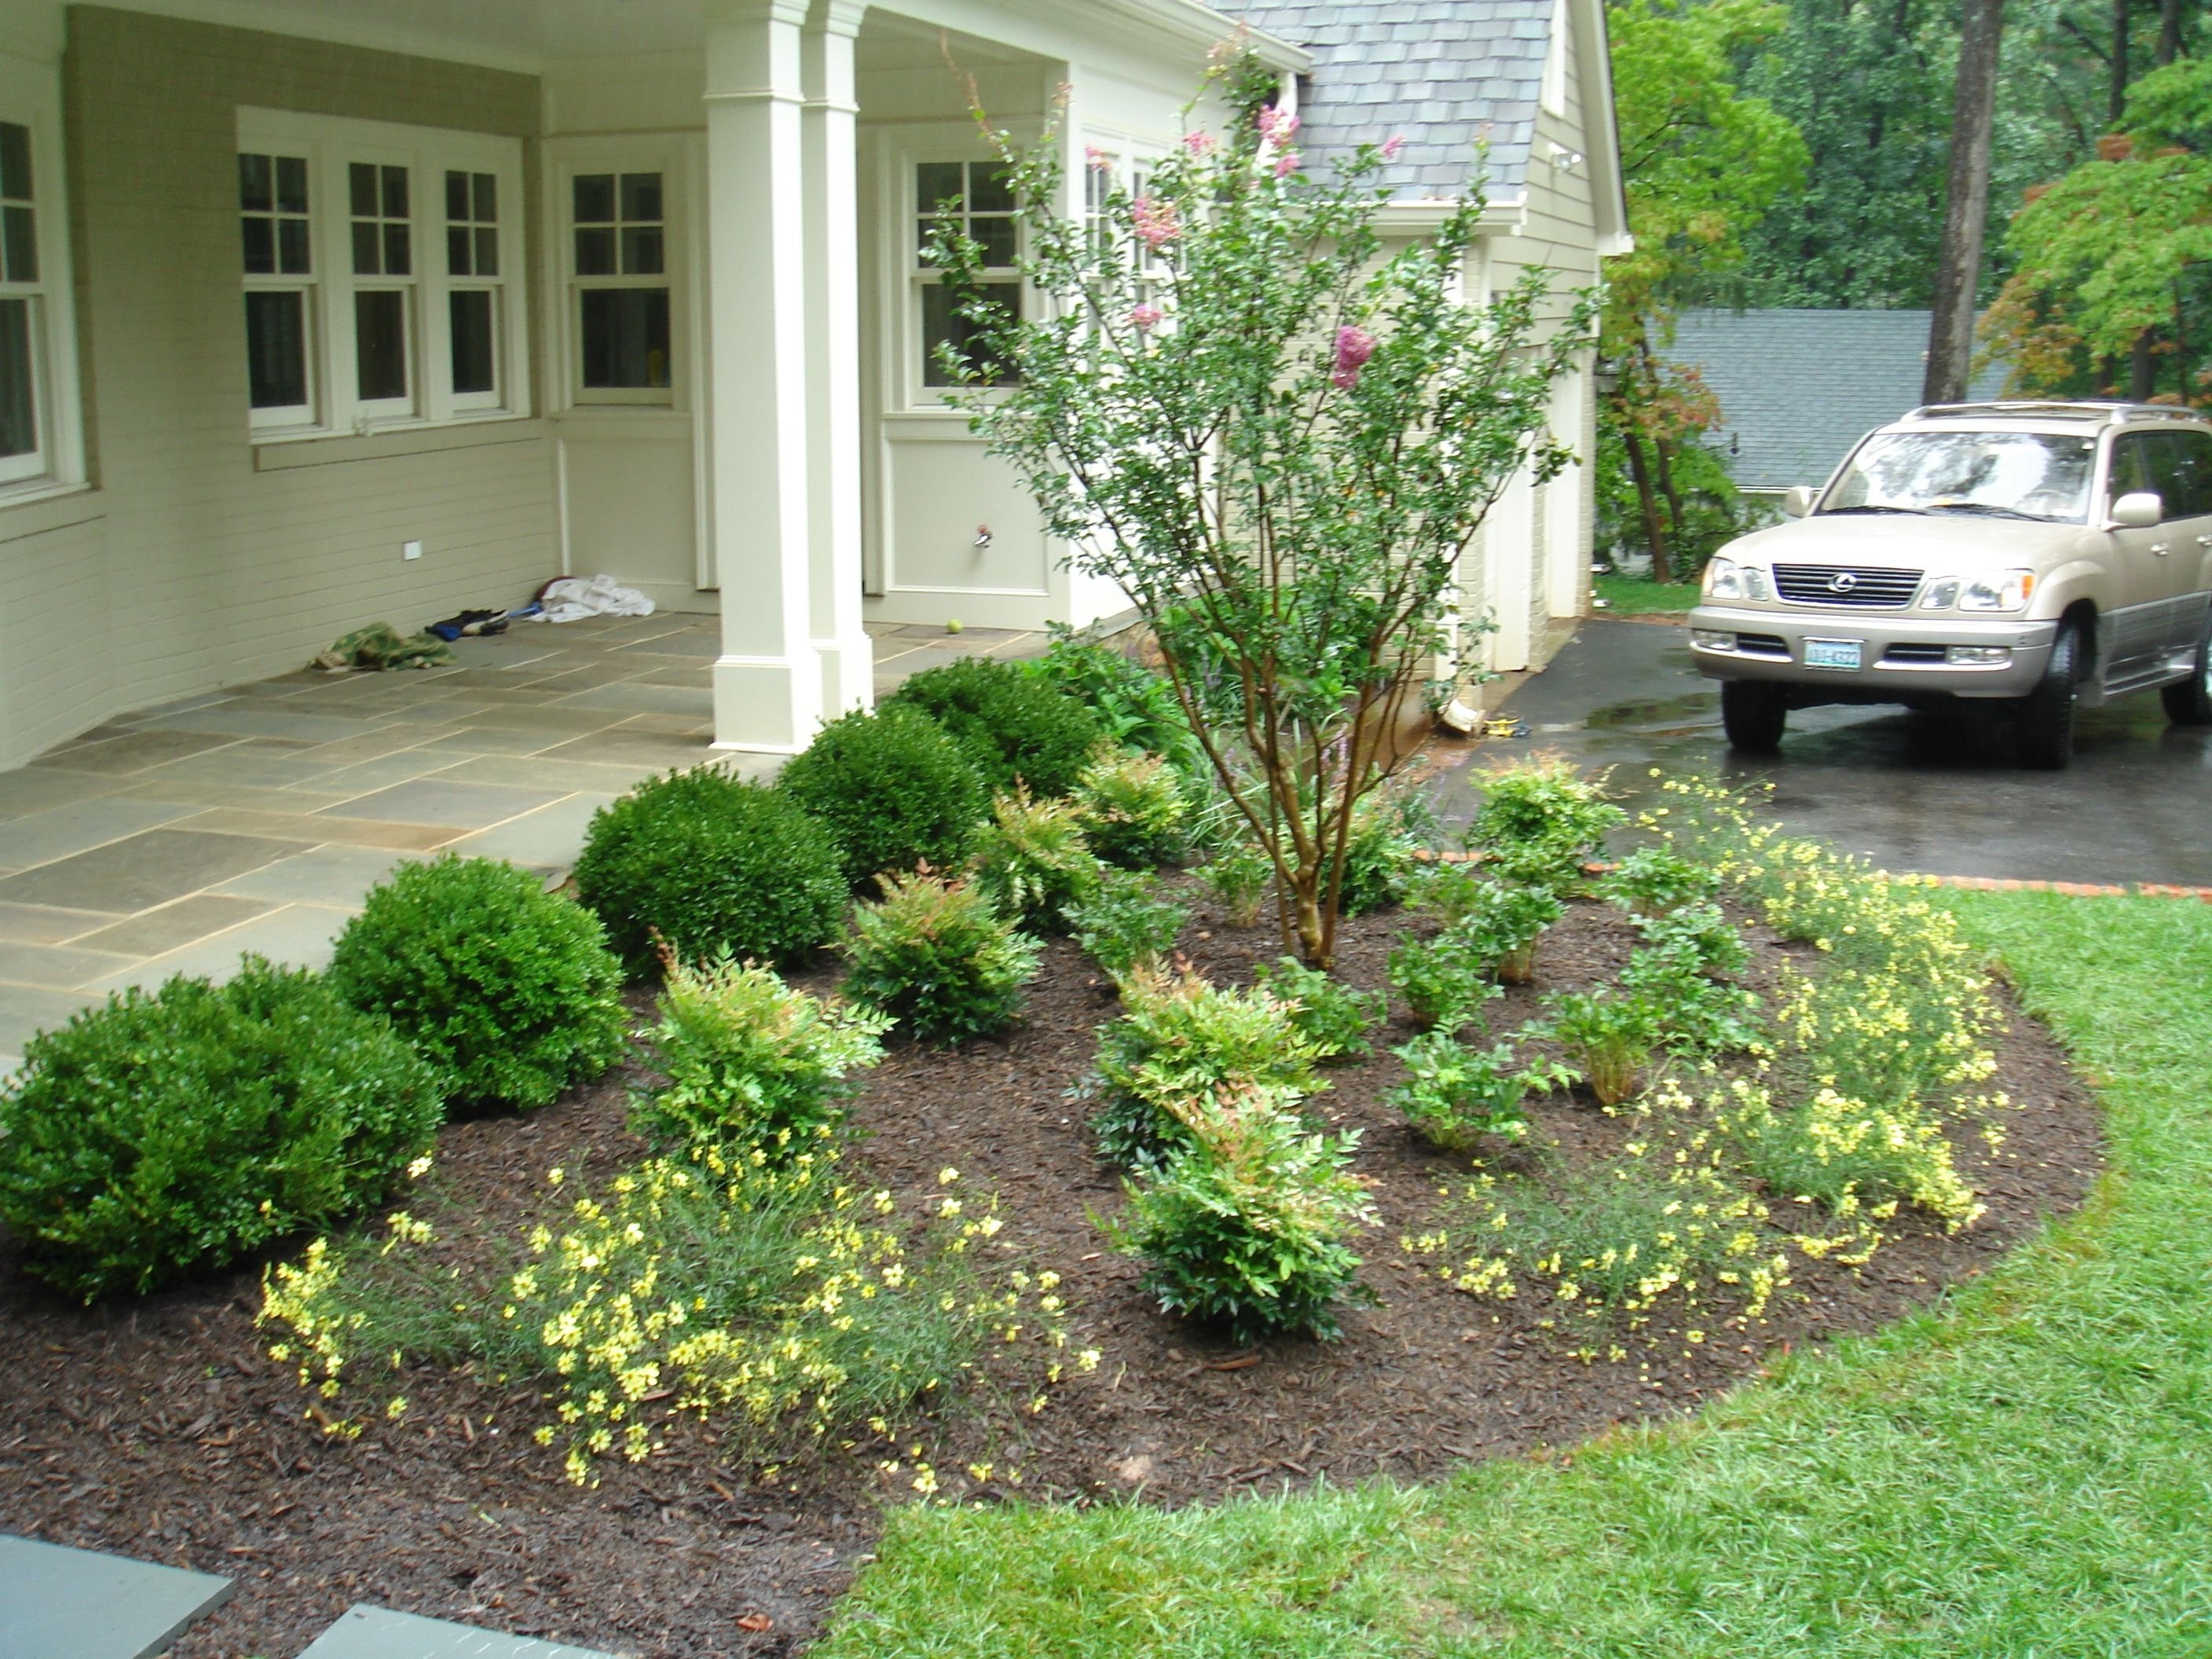 10 Pretty Small Front Yard Landscaping Ideas On A Budget 2023 - Simple Front YarD LanDscaping IDeas With Trees On A BuDget Love The